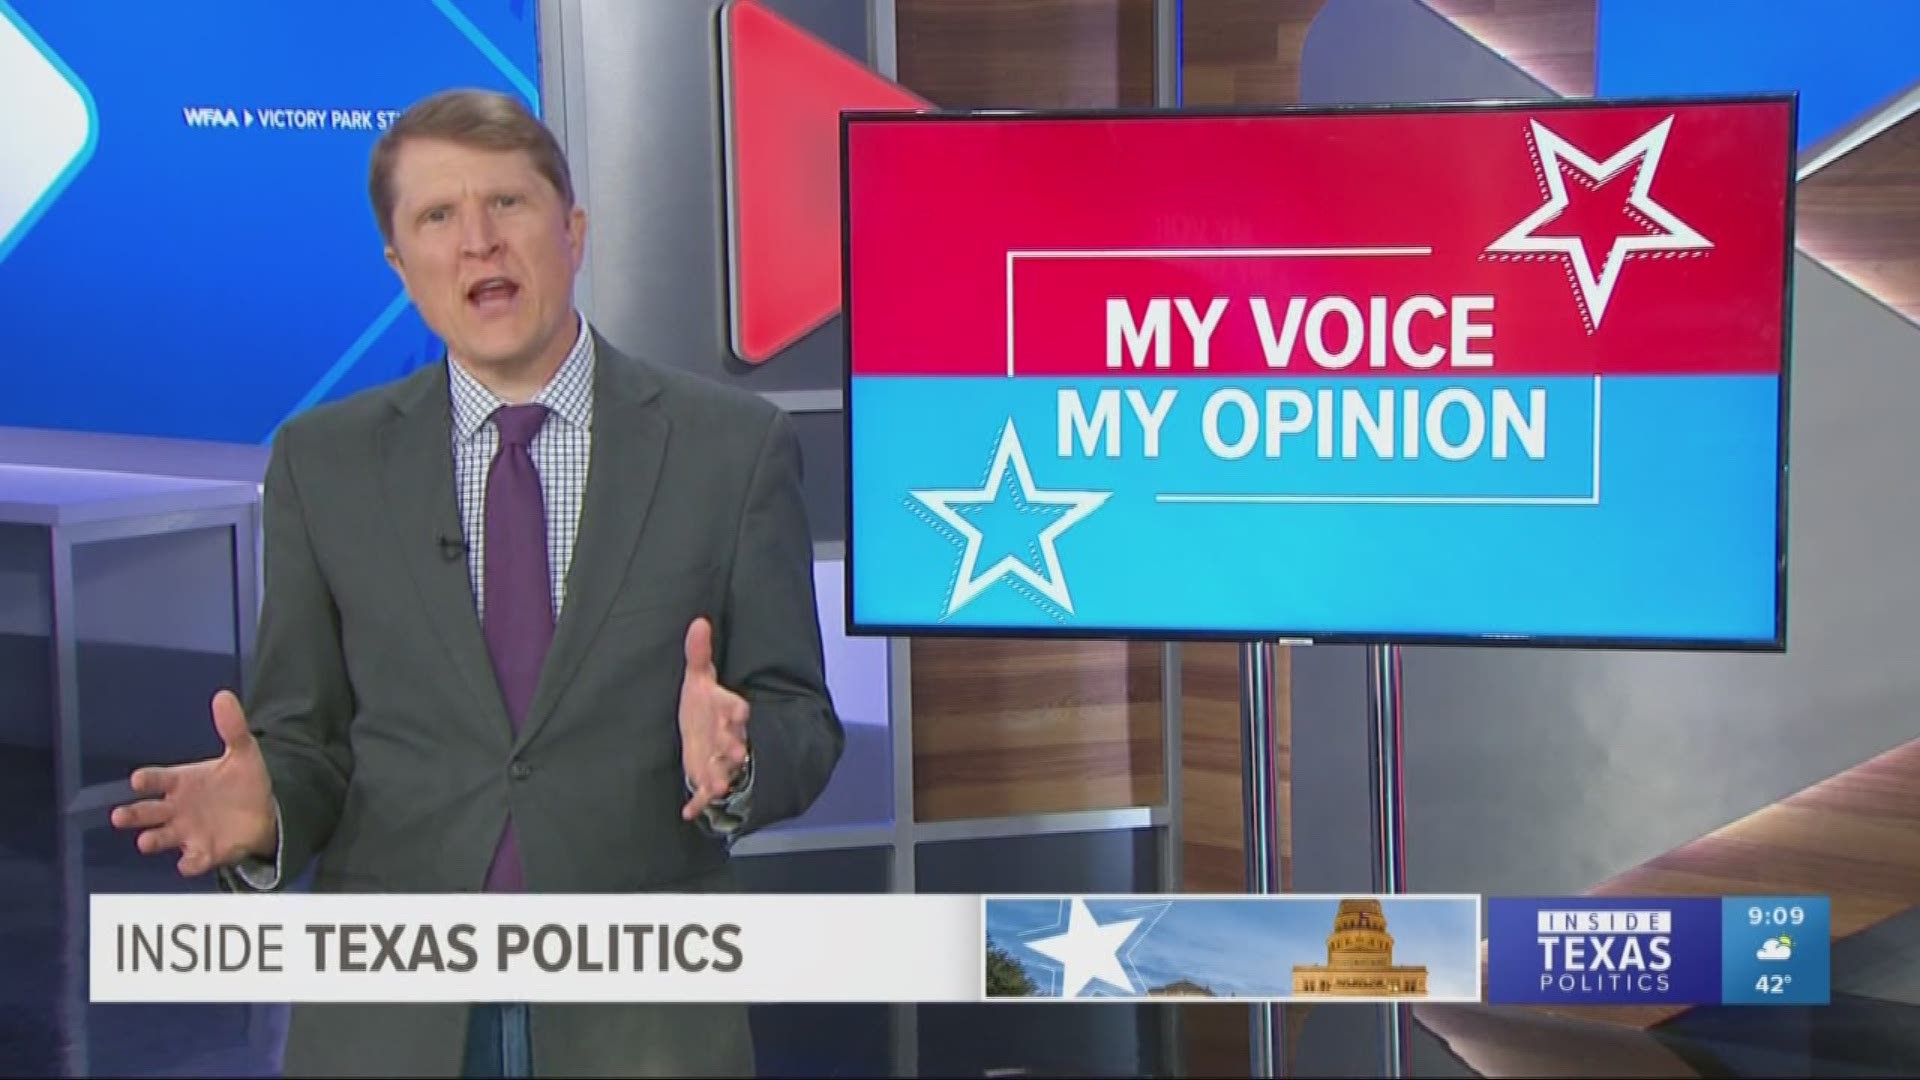 Chris Krok - from WBAP 820 AM – talks about President Trump’s re-election with this week’s My Voice, My Opinion.